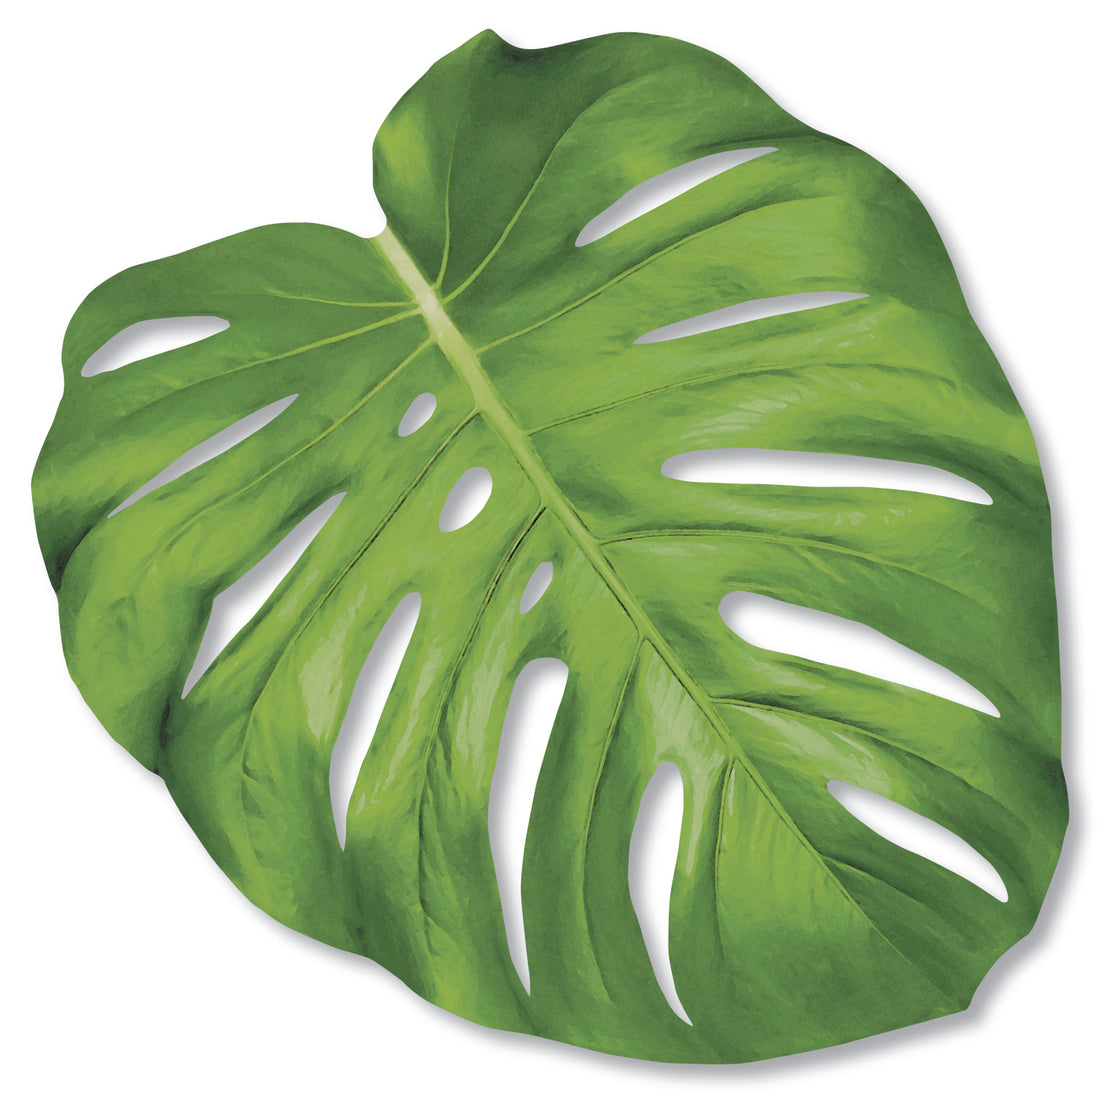 A die-cut, illustrated monstera leaf in vibrant green, with additional holes die-cut from the leaf.